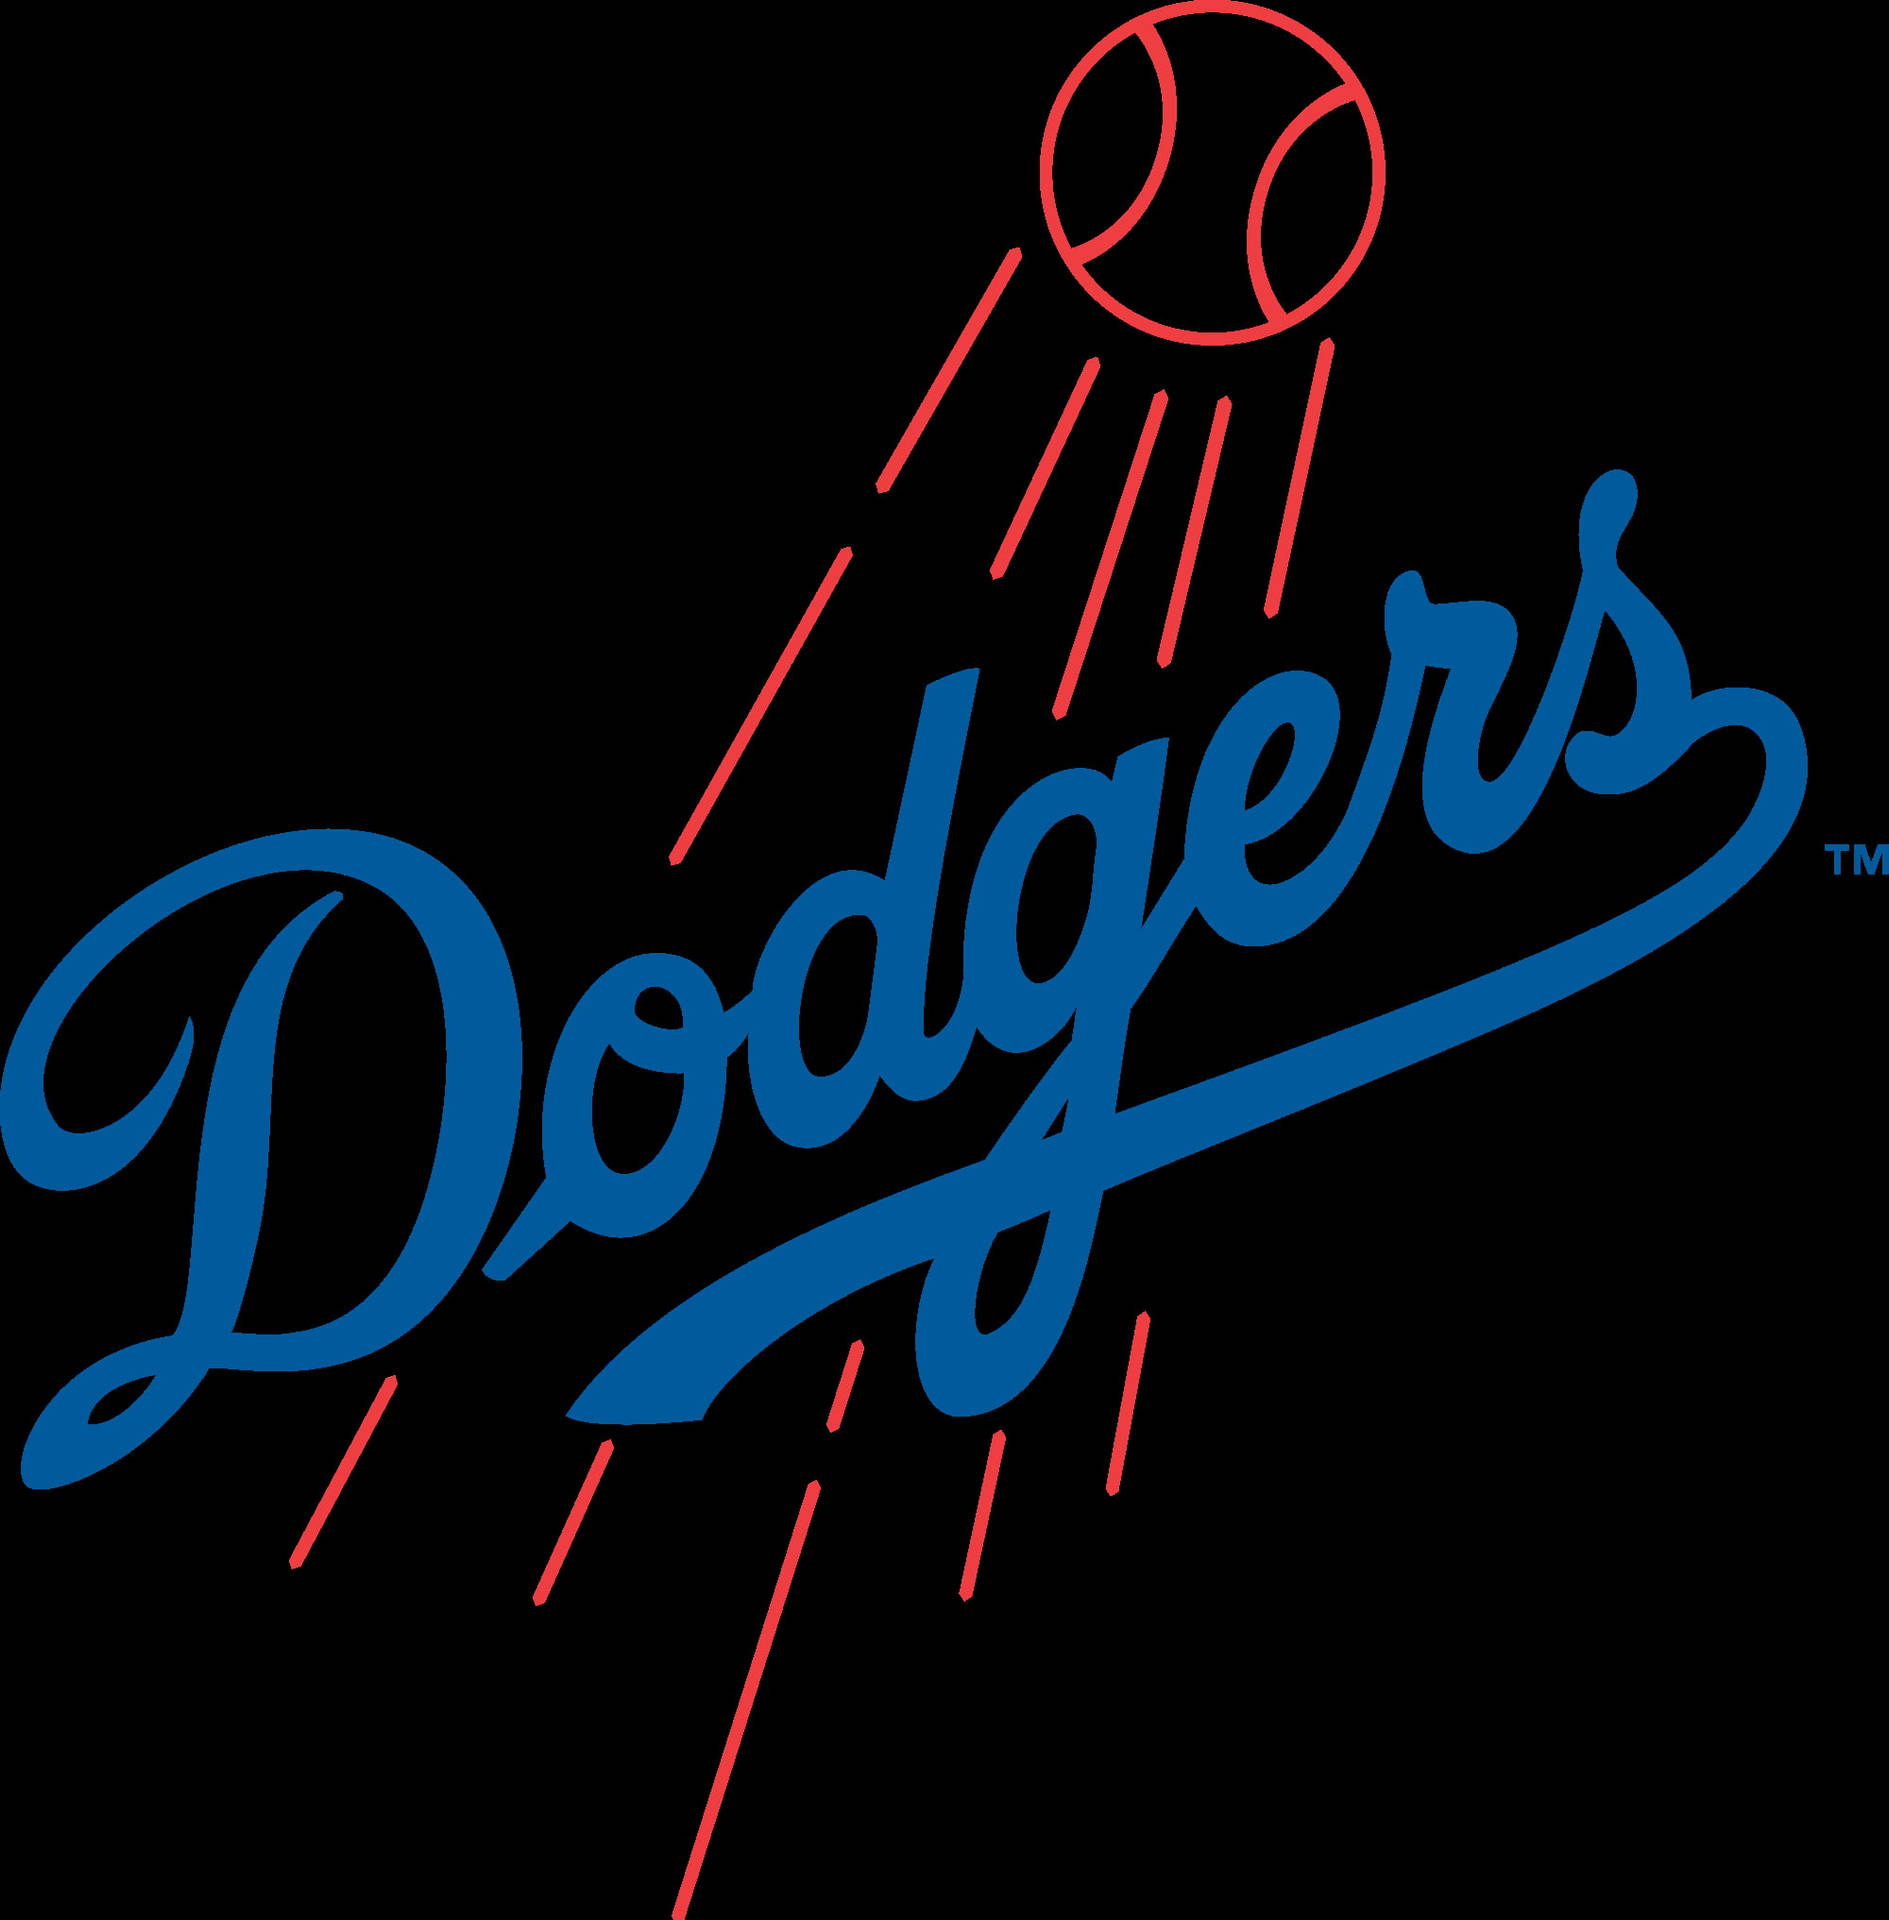 Los Angeles Dodgers Luminous Red Ball Background